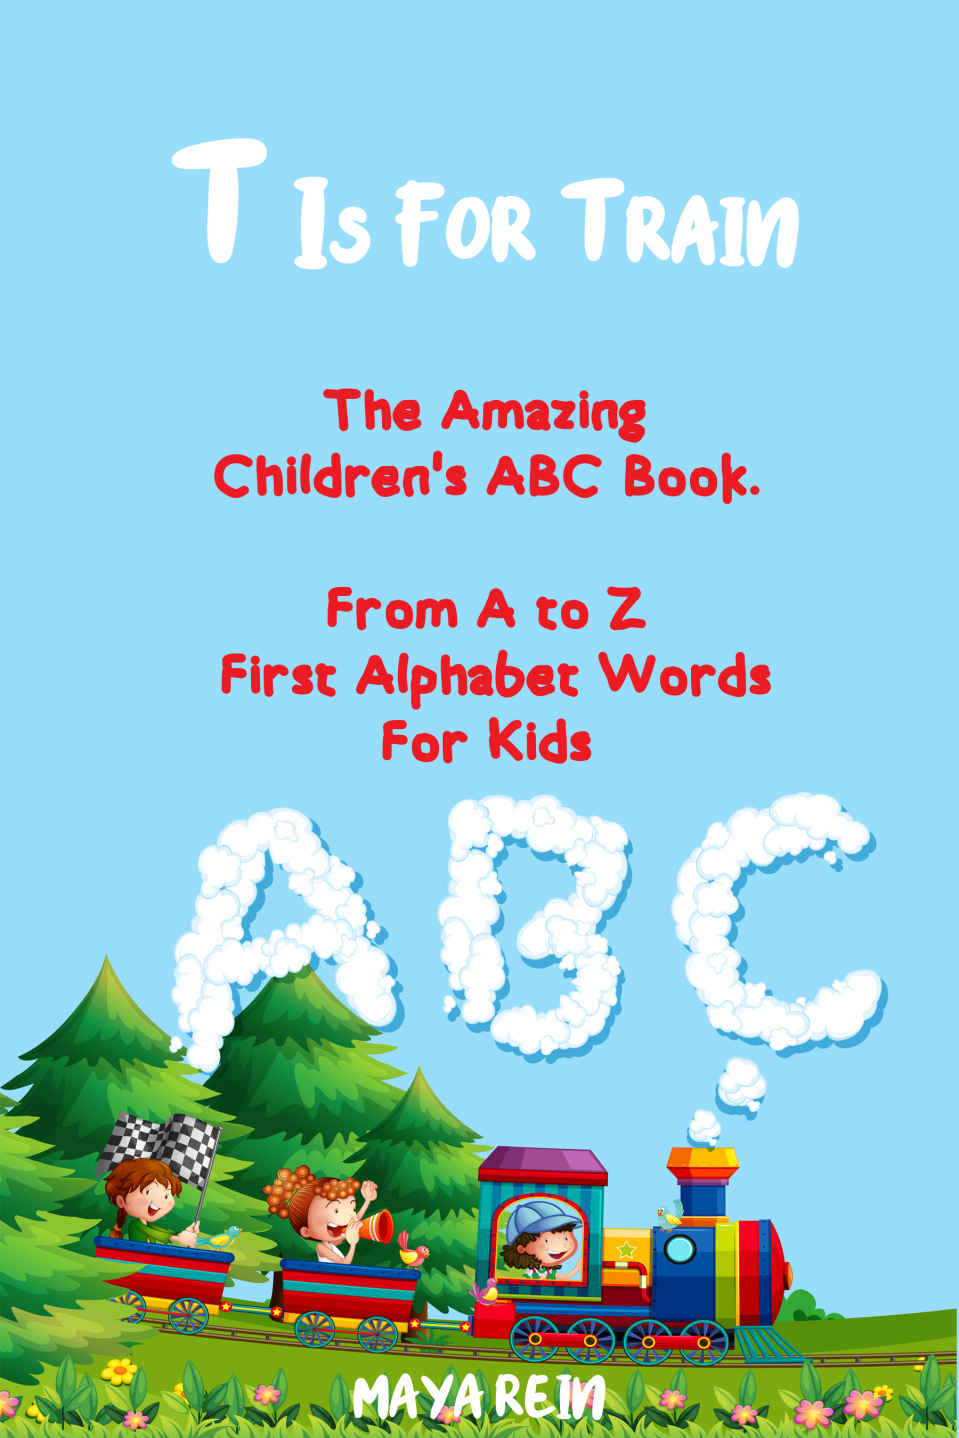 FREE: T is for Train. The Amazing Children’s ABC Book. From A to Z First Alphabet Words For Kids by Maya Rein